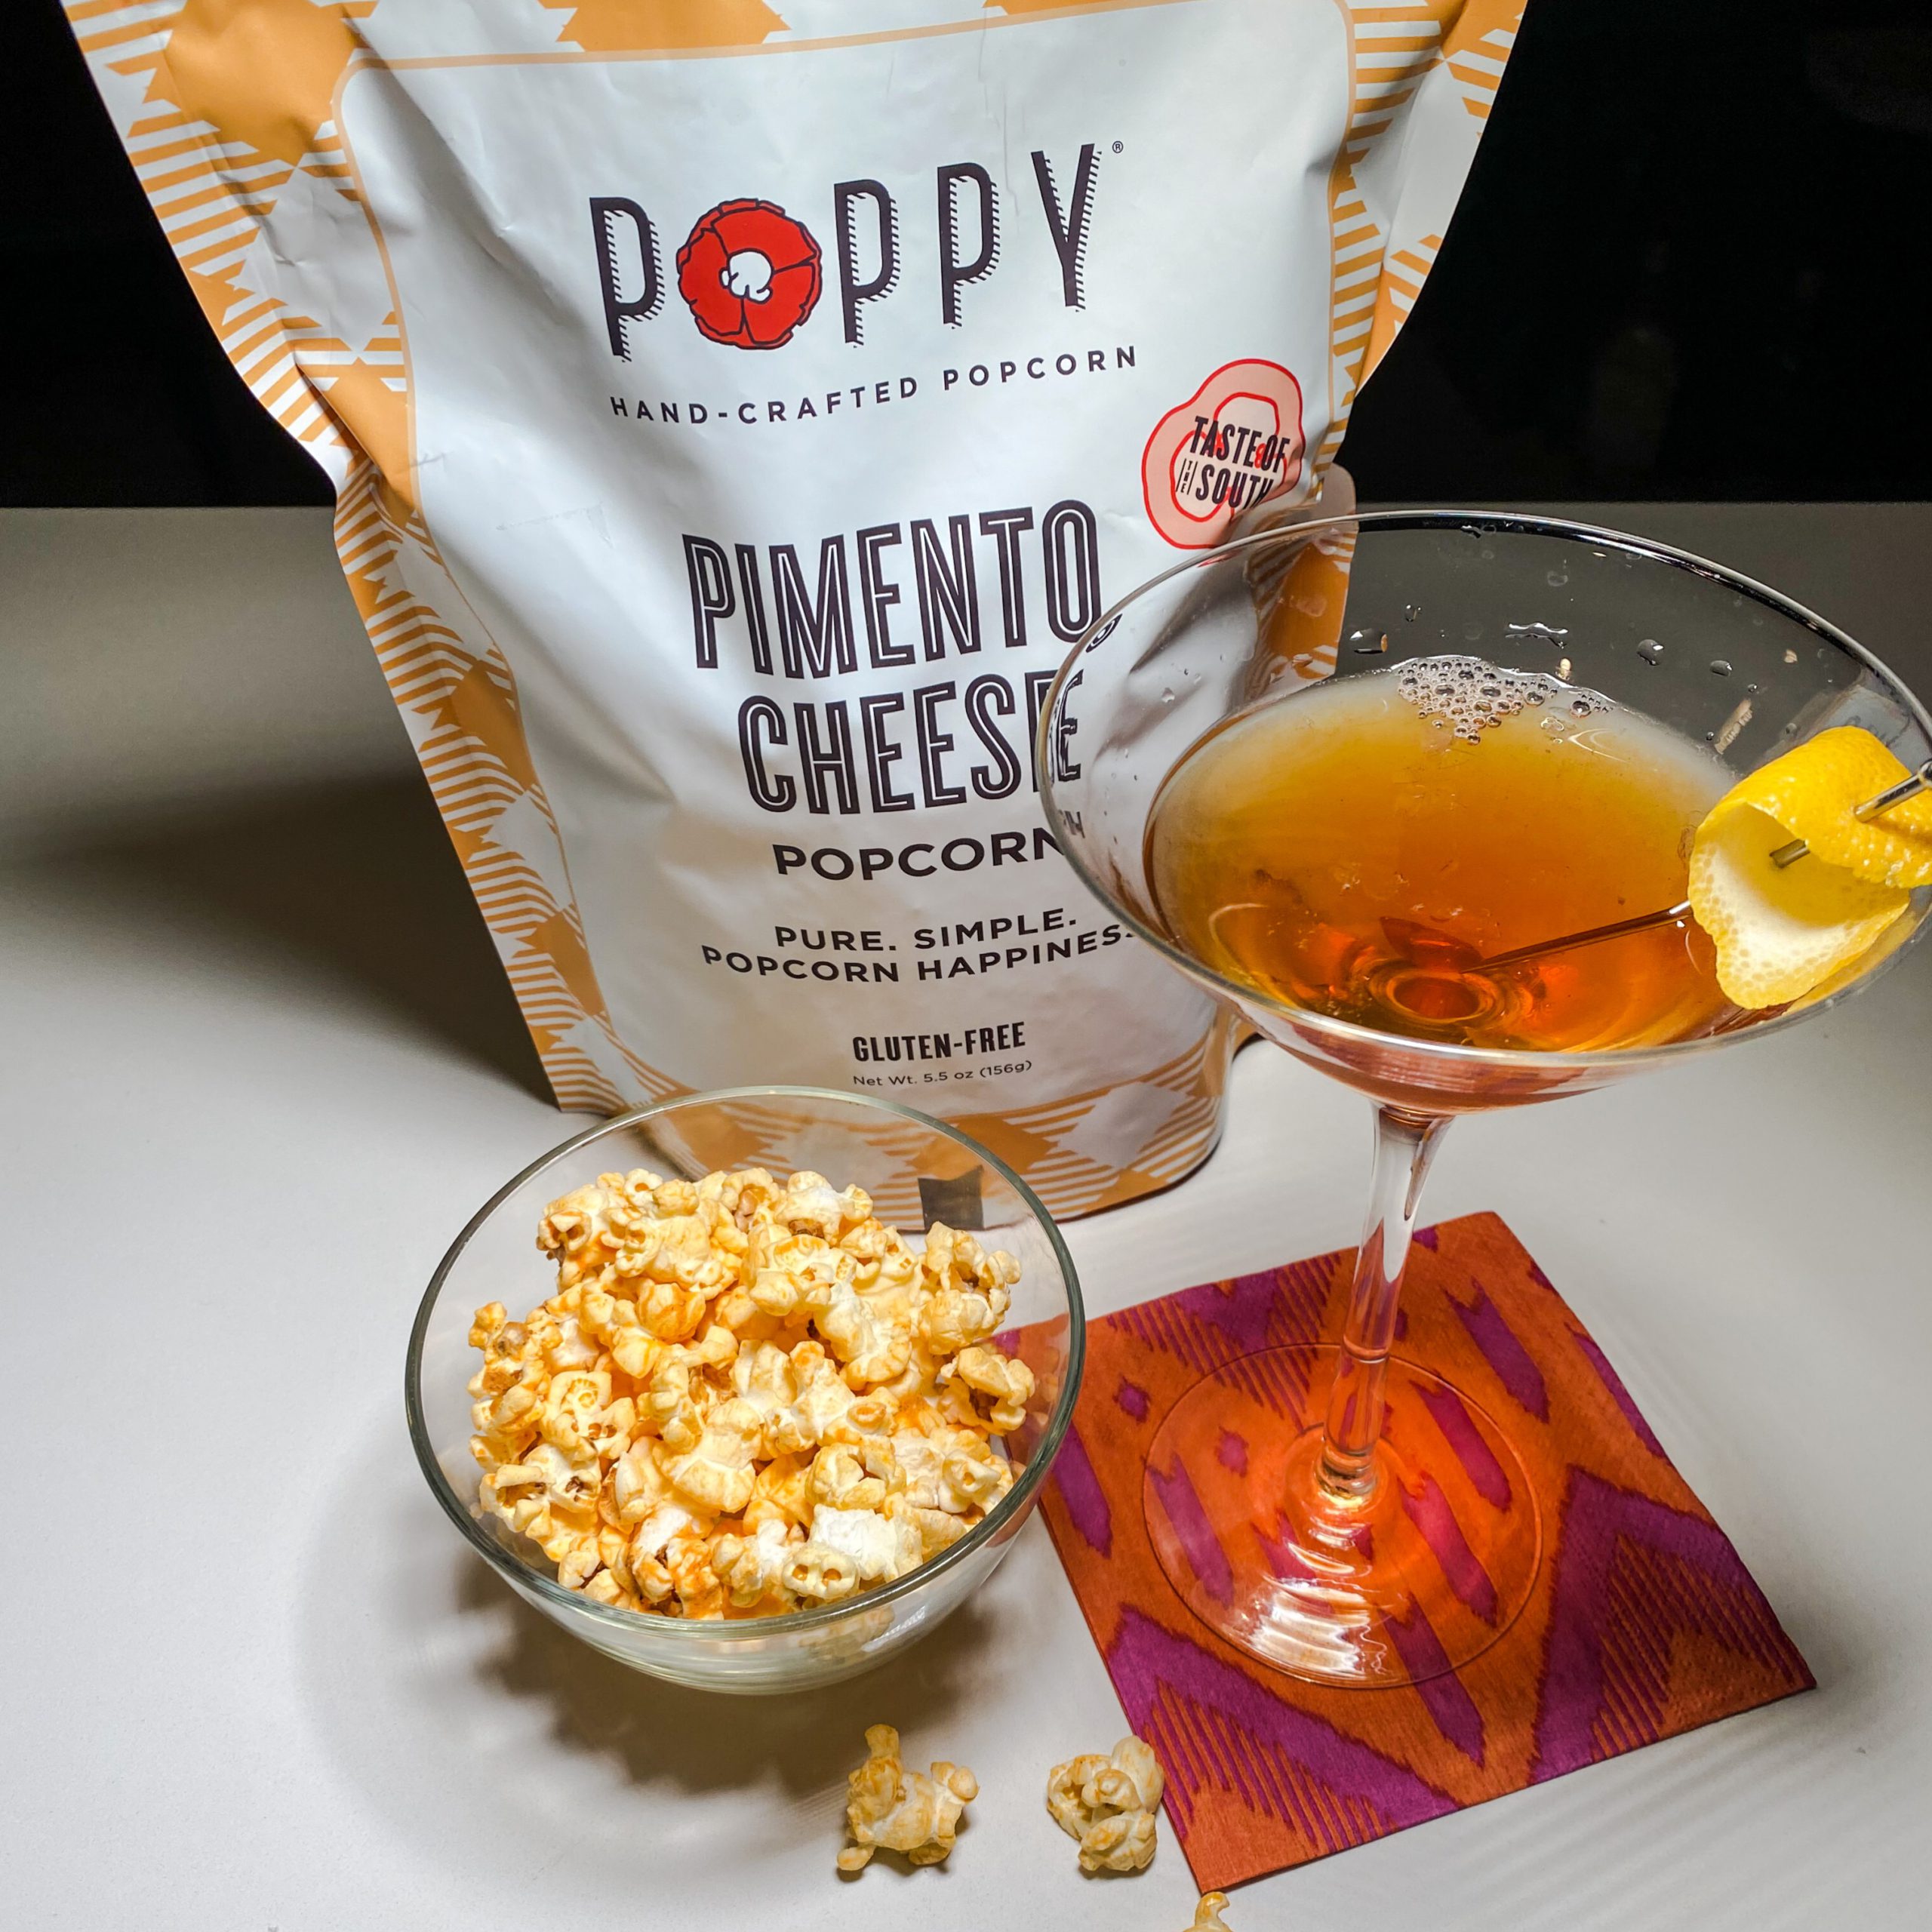 Fourth Regiment Cocktail Pairs Well With Pimento Cheese Popcorn